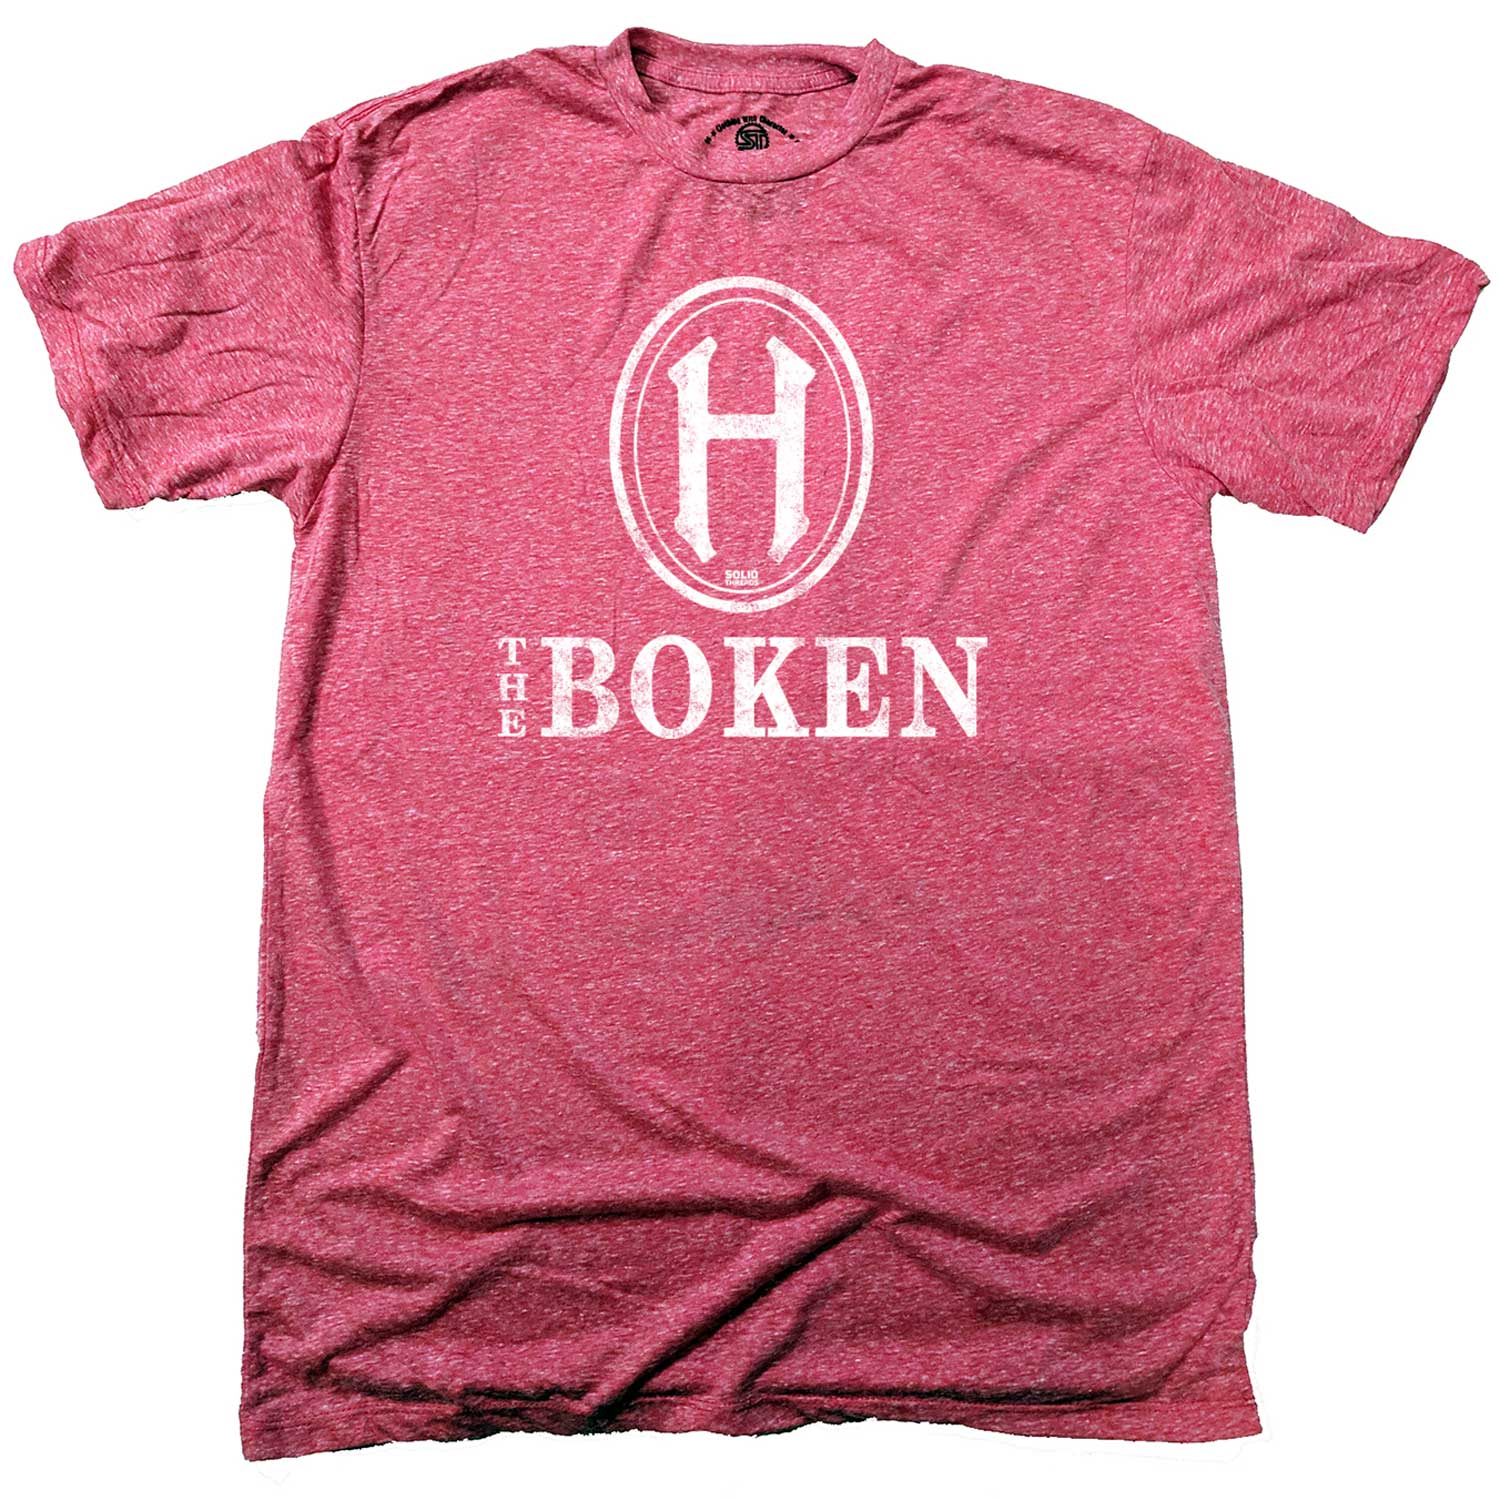 Men's The Boken Cool Graphic T-Shirt | Vintage New Jersey Royal Blue Tee | Solid Threads